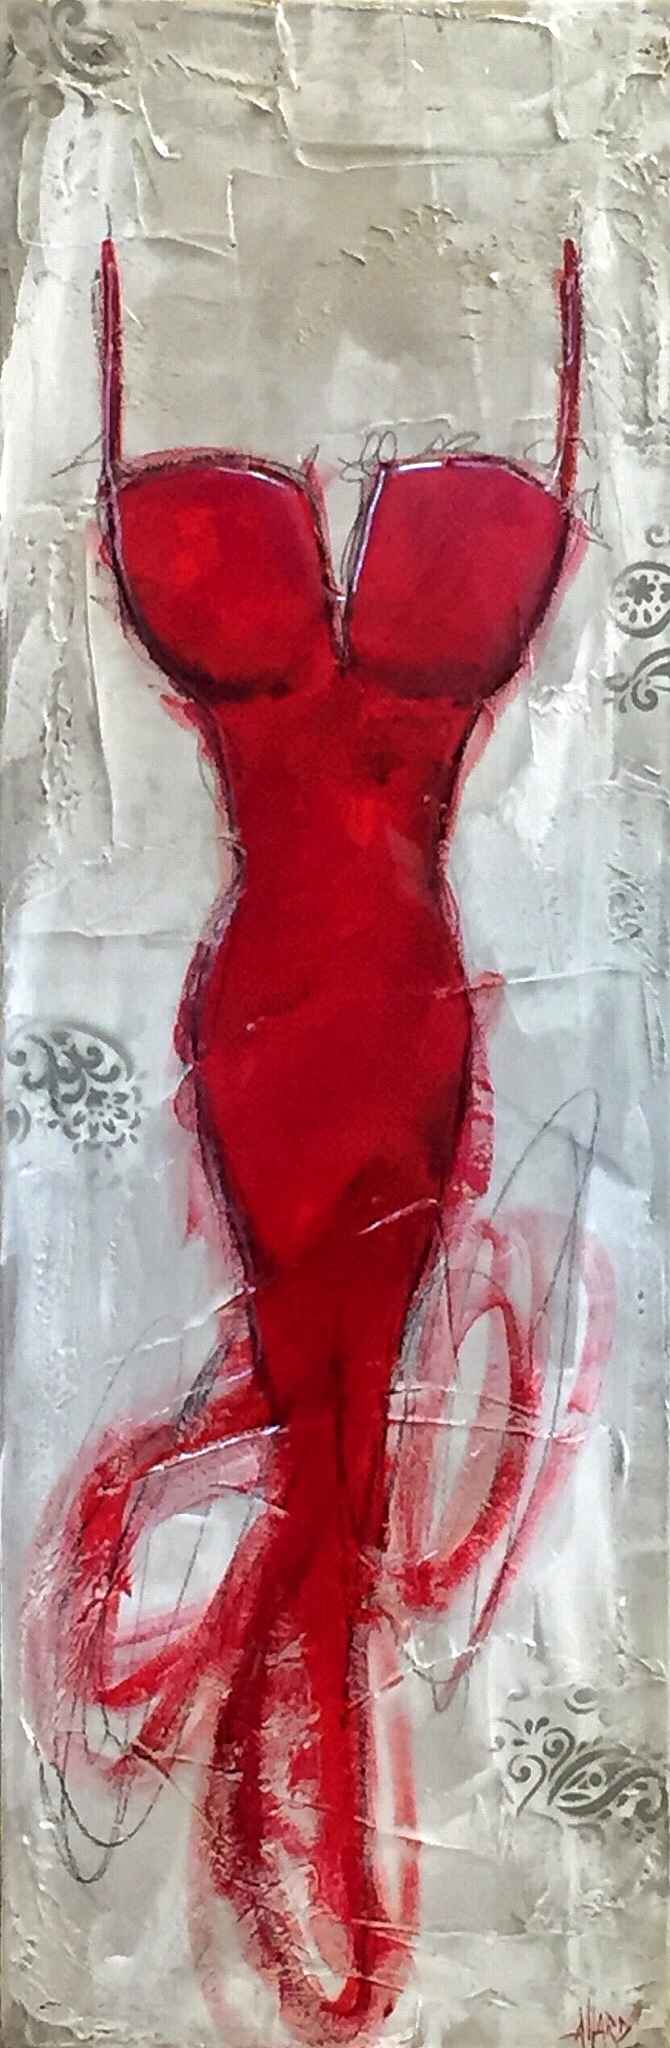 In Love, red dress painting by Valerie Allard | Effusion Art Gallery + cast Glass Studio, Invermere BC